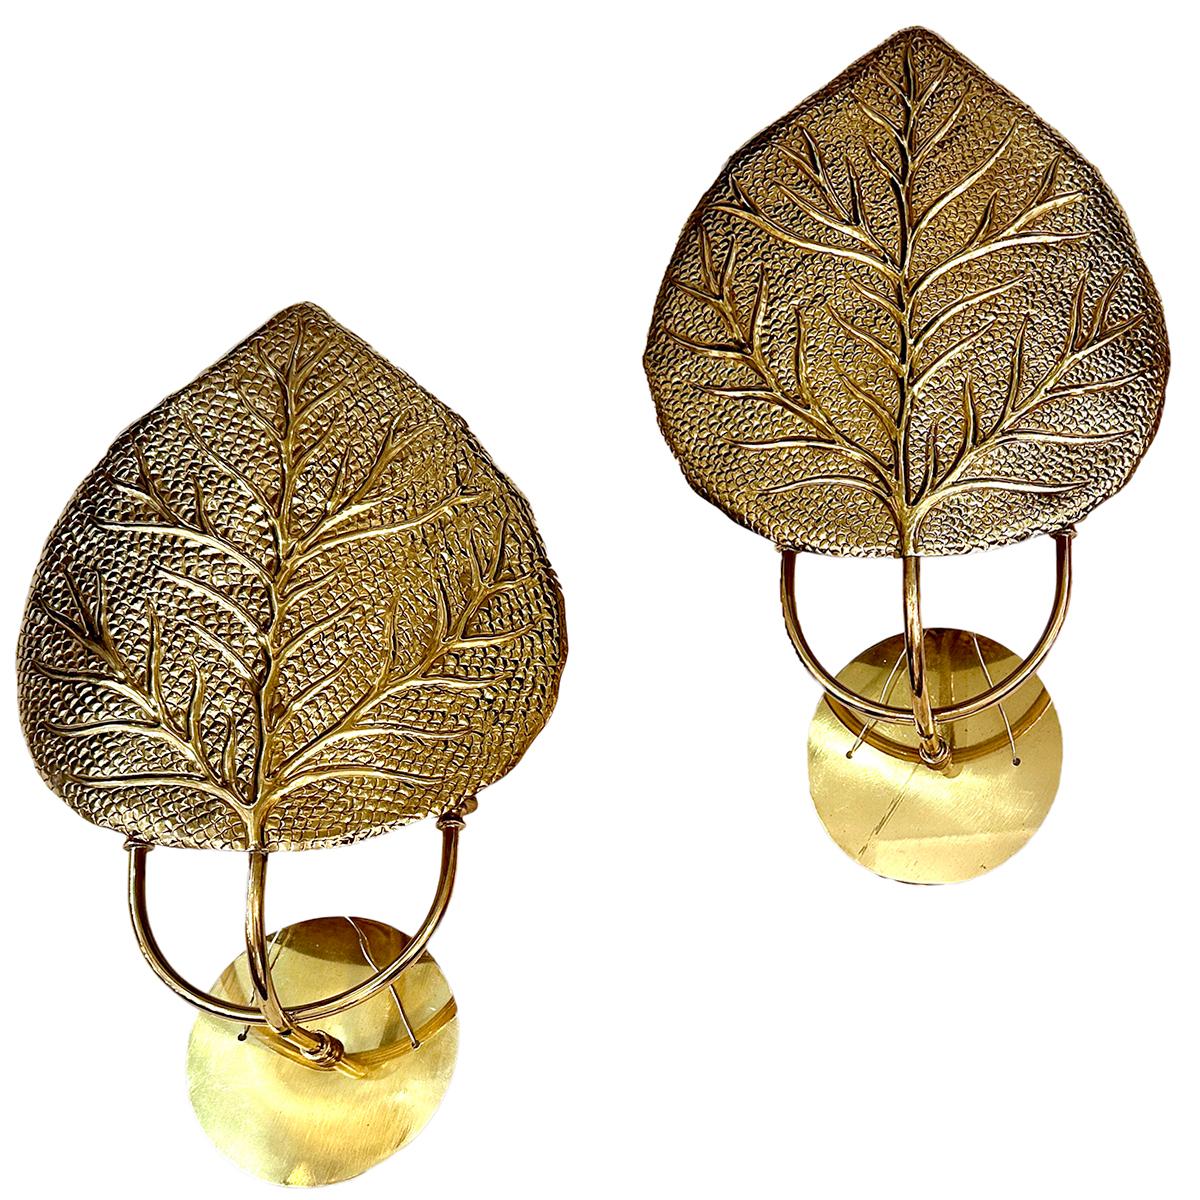 Set of six 1960's Italian repoussé brass sconces with two lights. Sold per pair.

Measurements:
Height: 17